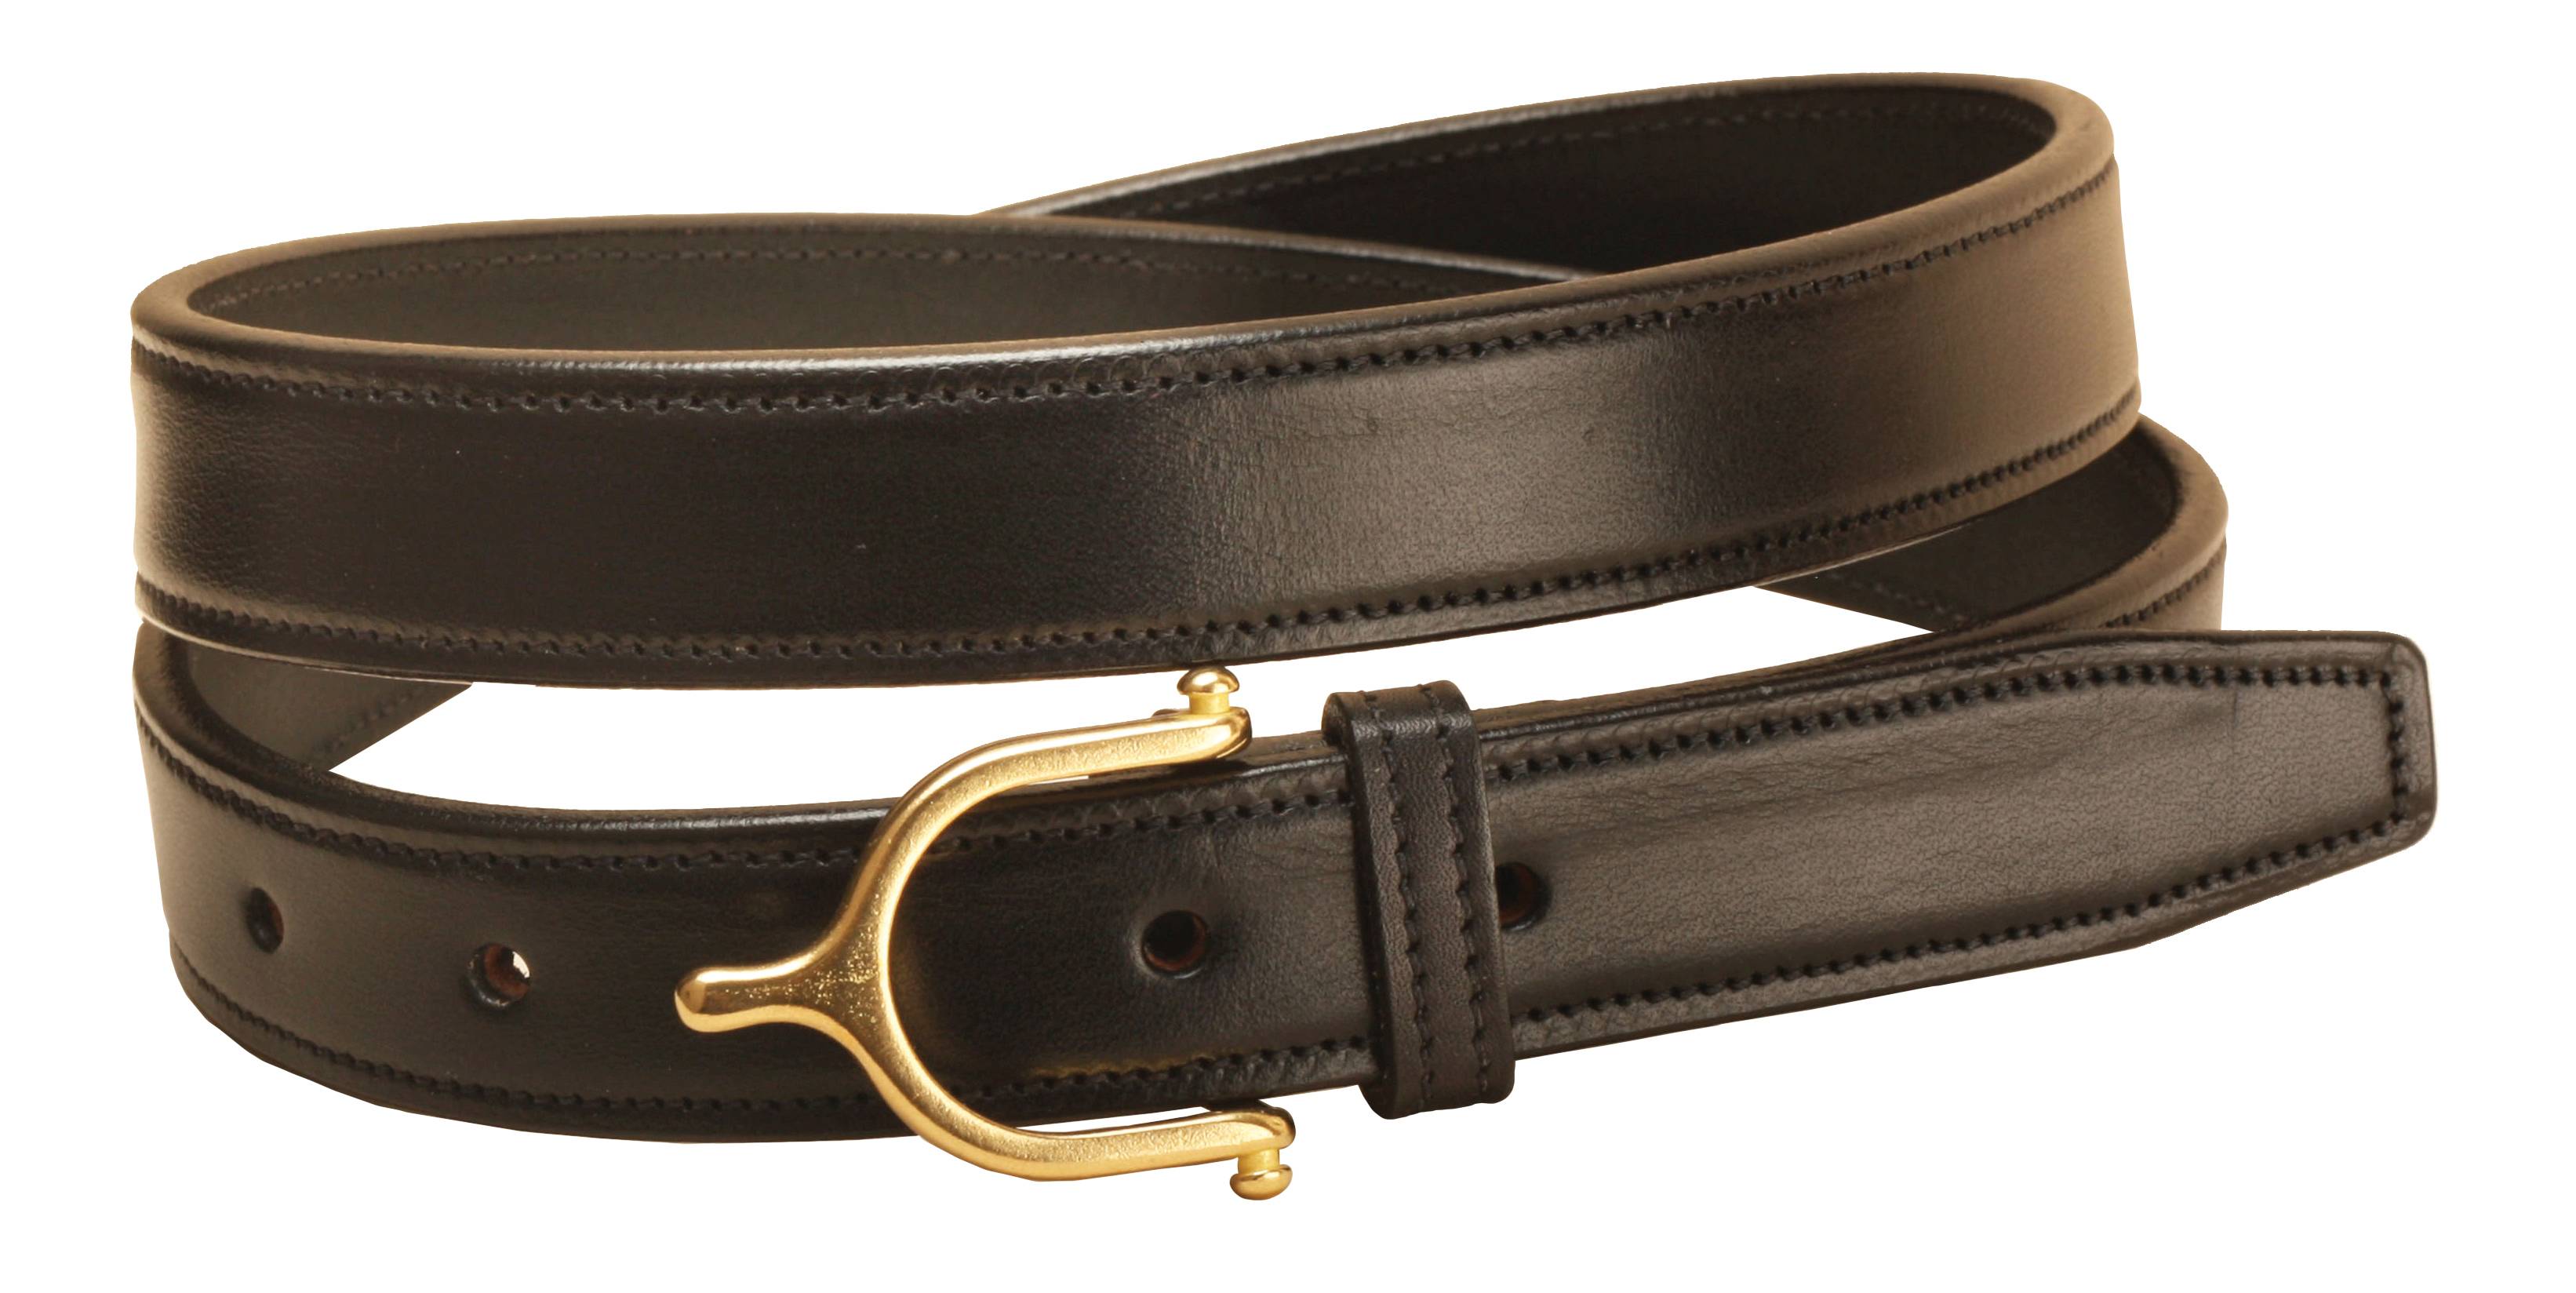 TORY LEATHER 1 Belt with Spur Buckle | EquestrianCollections